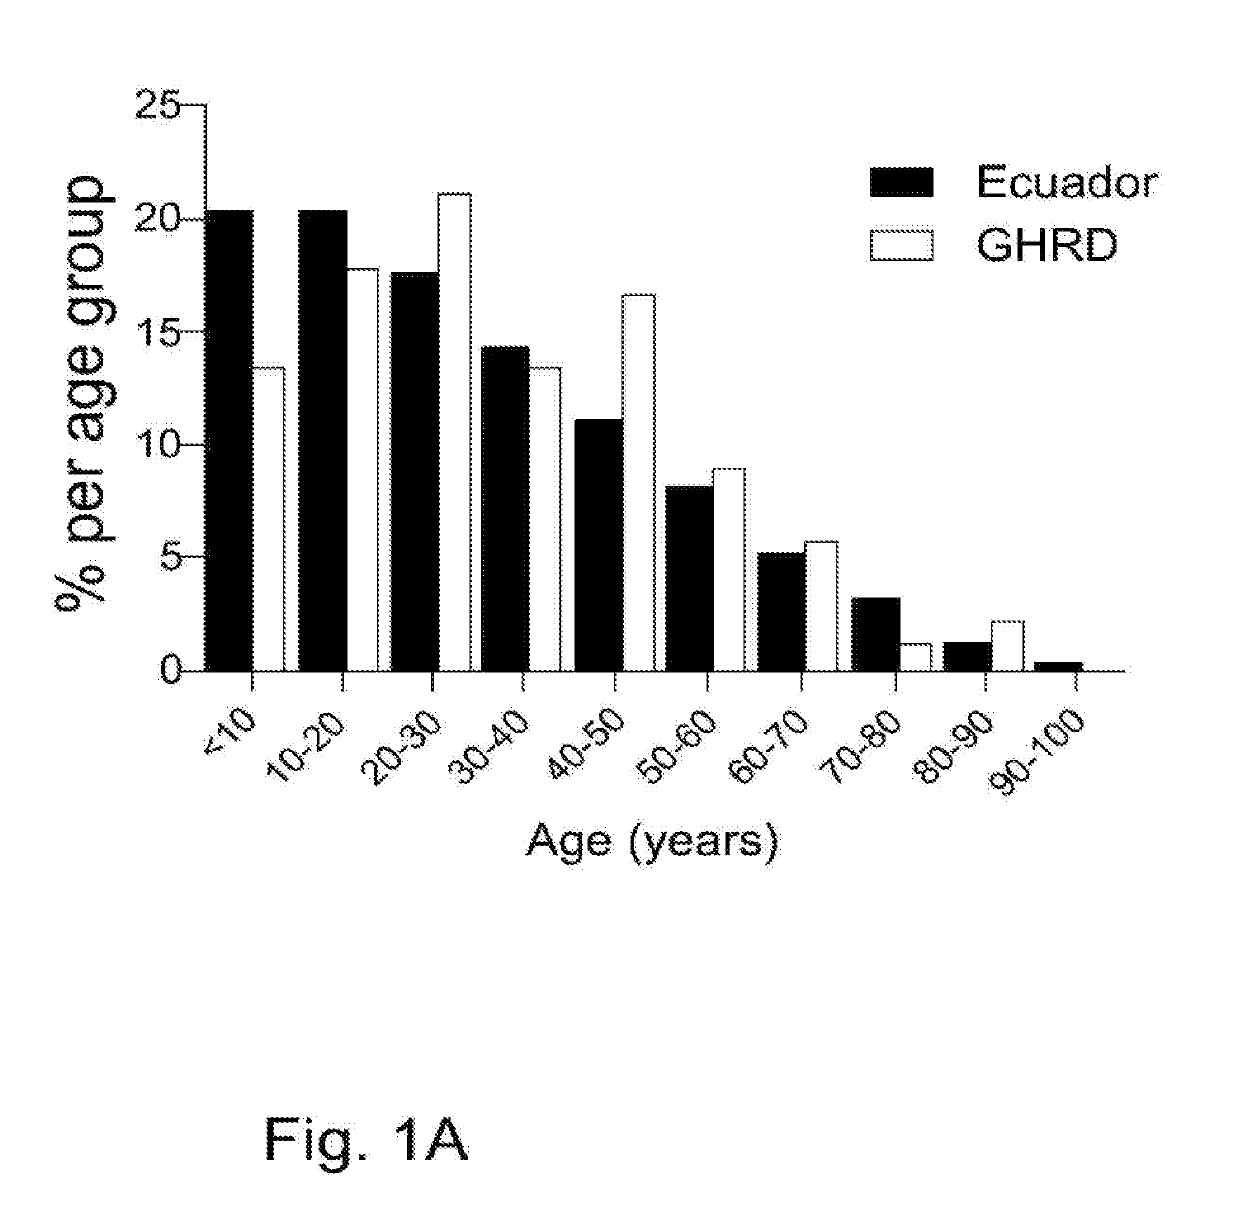 Growth hormone receptor deficiency causes a major reduction in pro-aging signaling, cancer and diabetes in humans